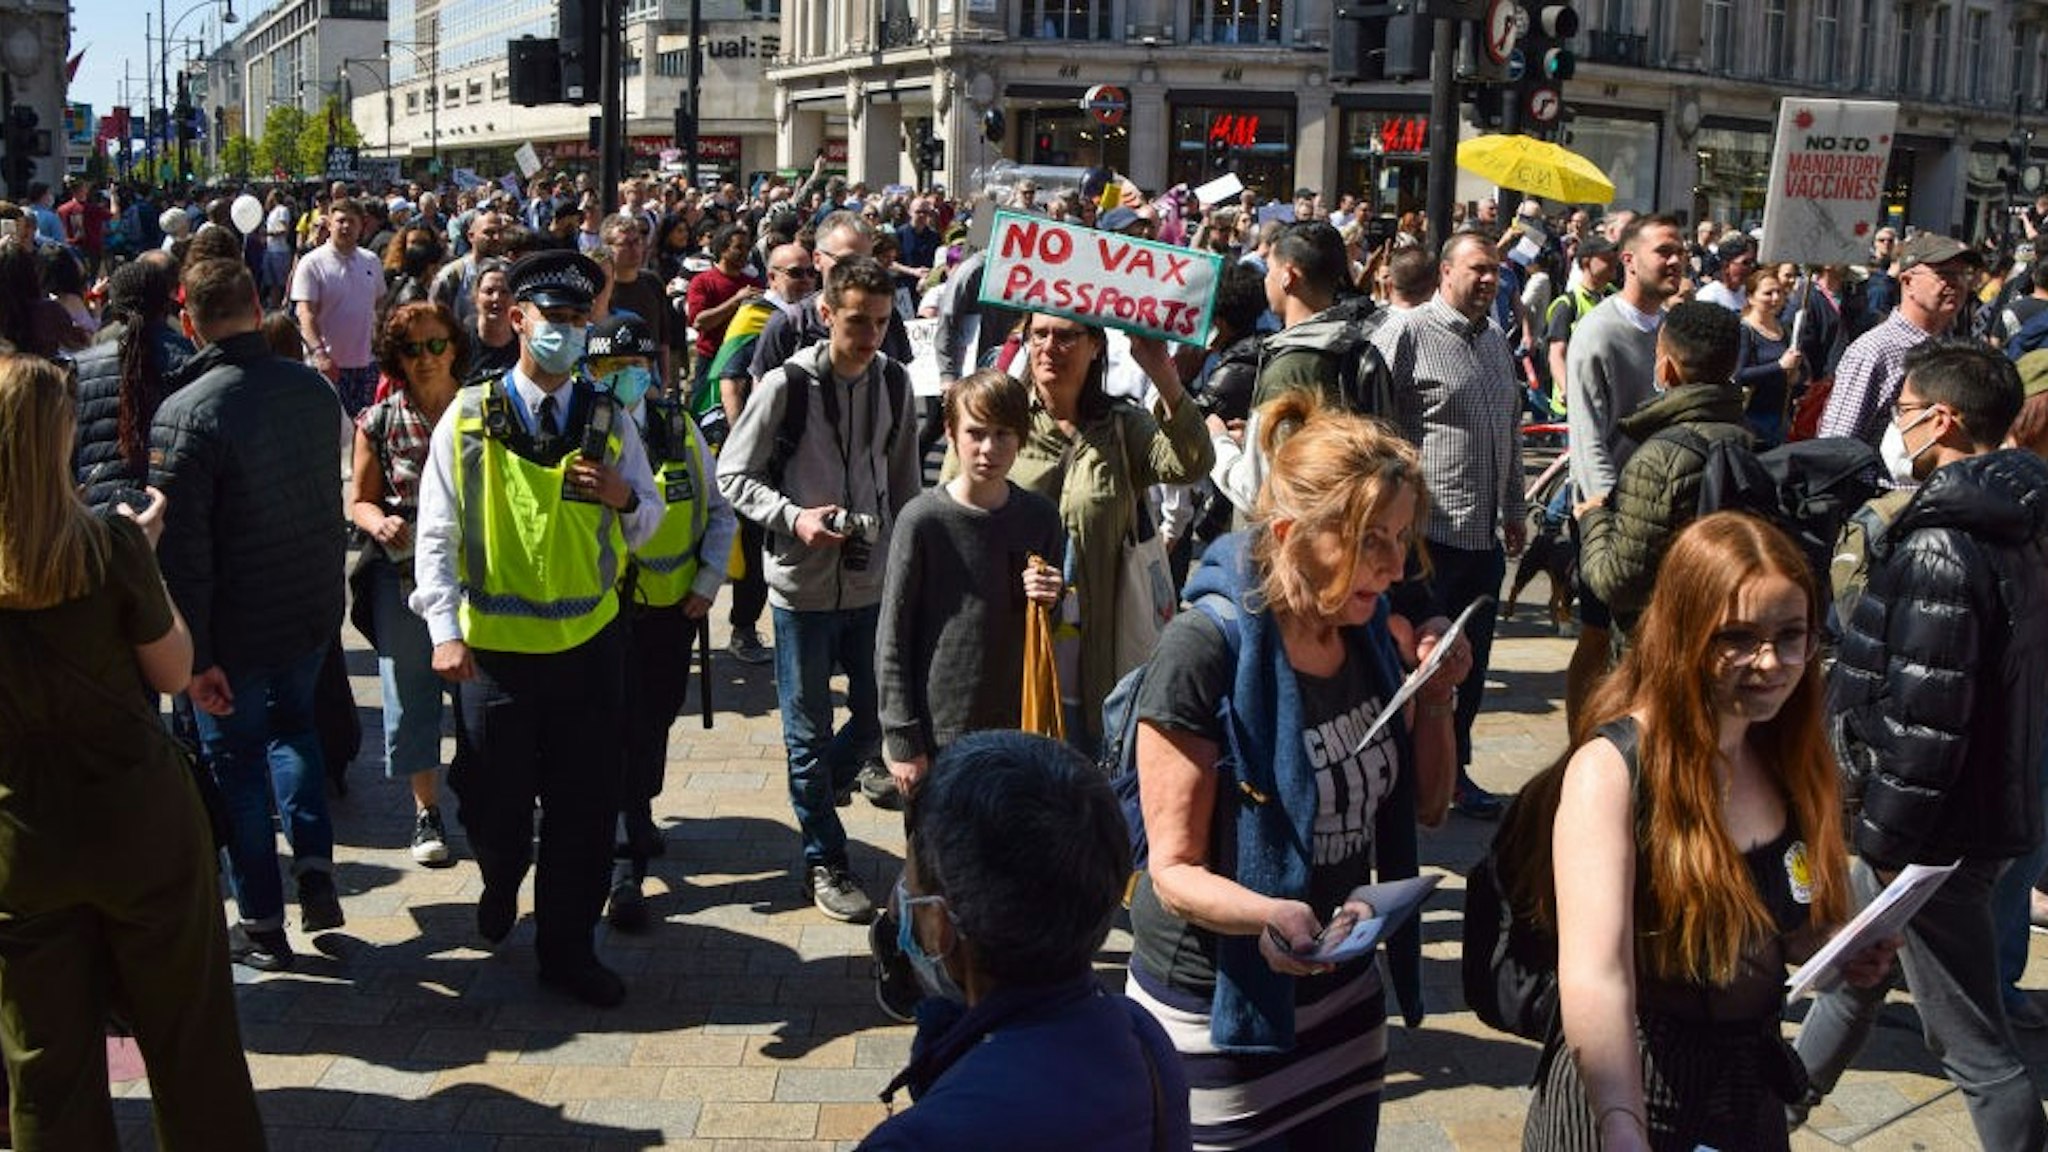 LONDON, UNITED KINGDOM - 2021/04/24: Crowd of protesters seen marching in Oxford Circus during the anti-lockdown demonstration. Thousands of people marched through Central London in protest against health passports, protective masks, Covid-19 vaccines and lockdown restrictions. (Photo by